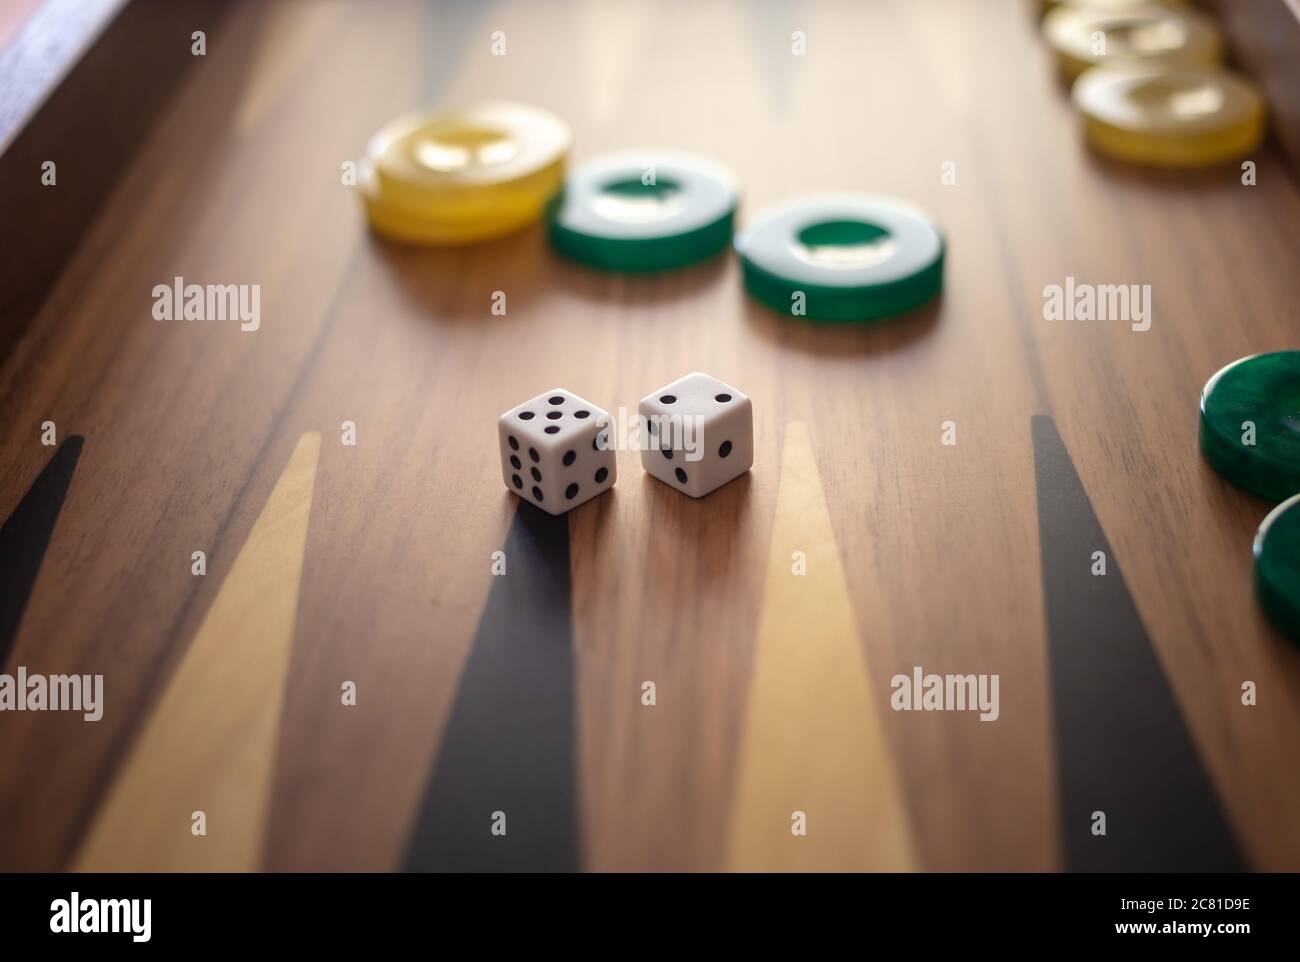 Backgammon, playing an ancient table game. Dice and chips on the backgammon board. Strategy and luck, leisure, entertainment concept. Stock Photo